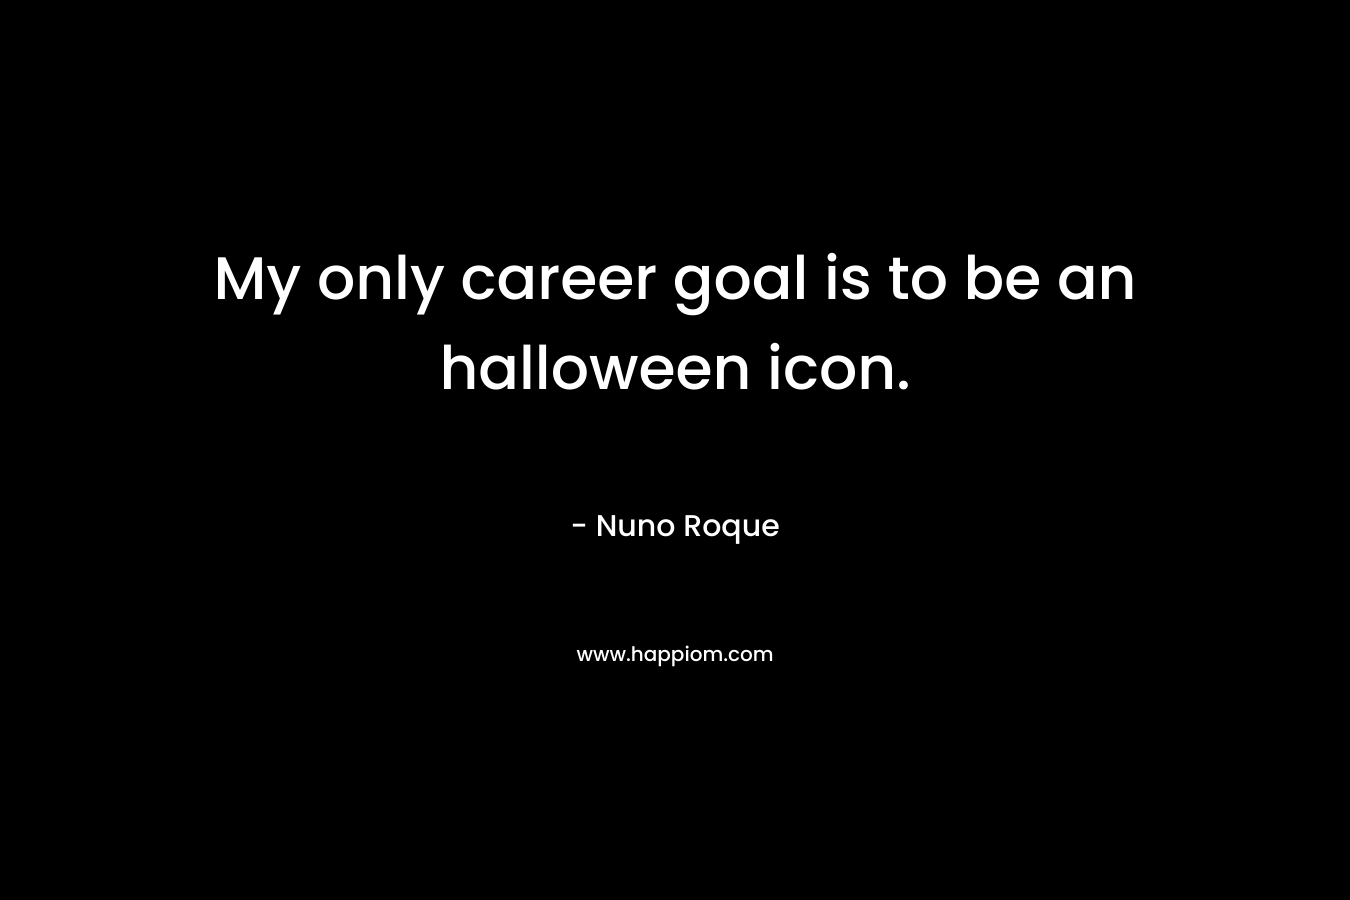 My only career goal is to be an halloween icon.